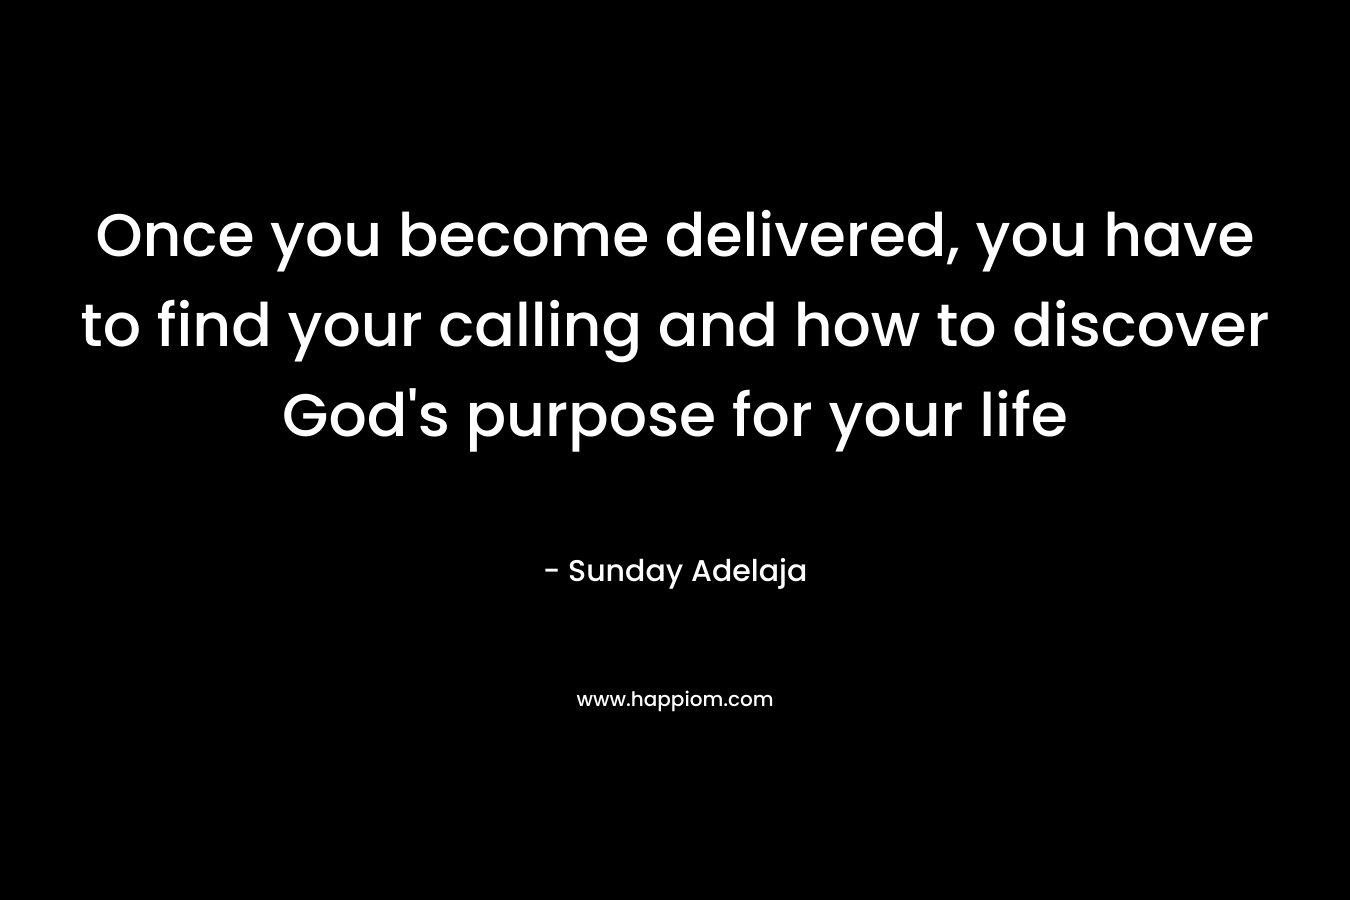 Once you become delivered, you have to find your calling and how to discover God's purpose for your life